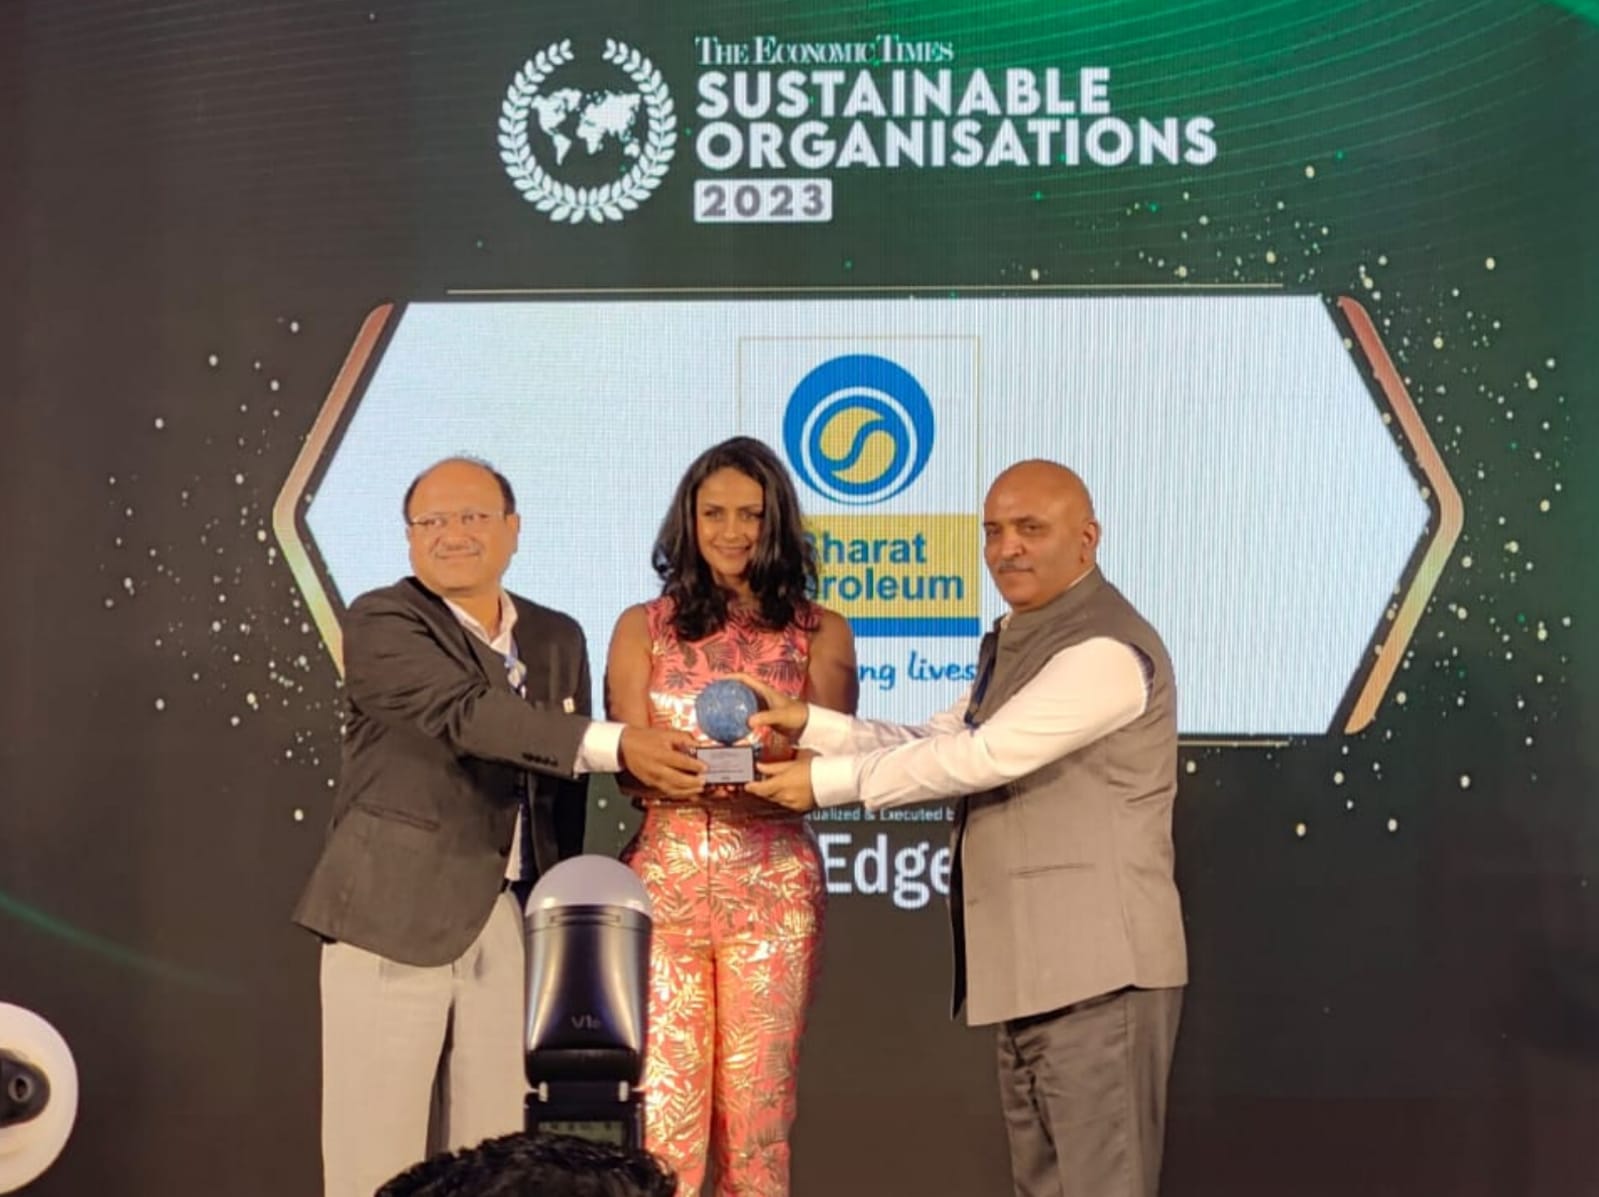 BPCL has been recognized as one of the most "Sustainable organizations" by Economic Times Edge